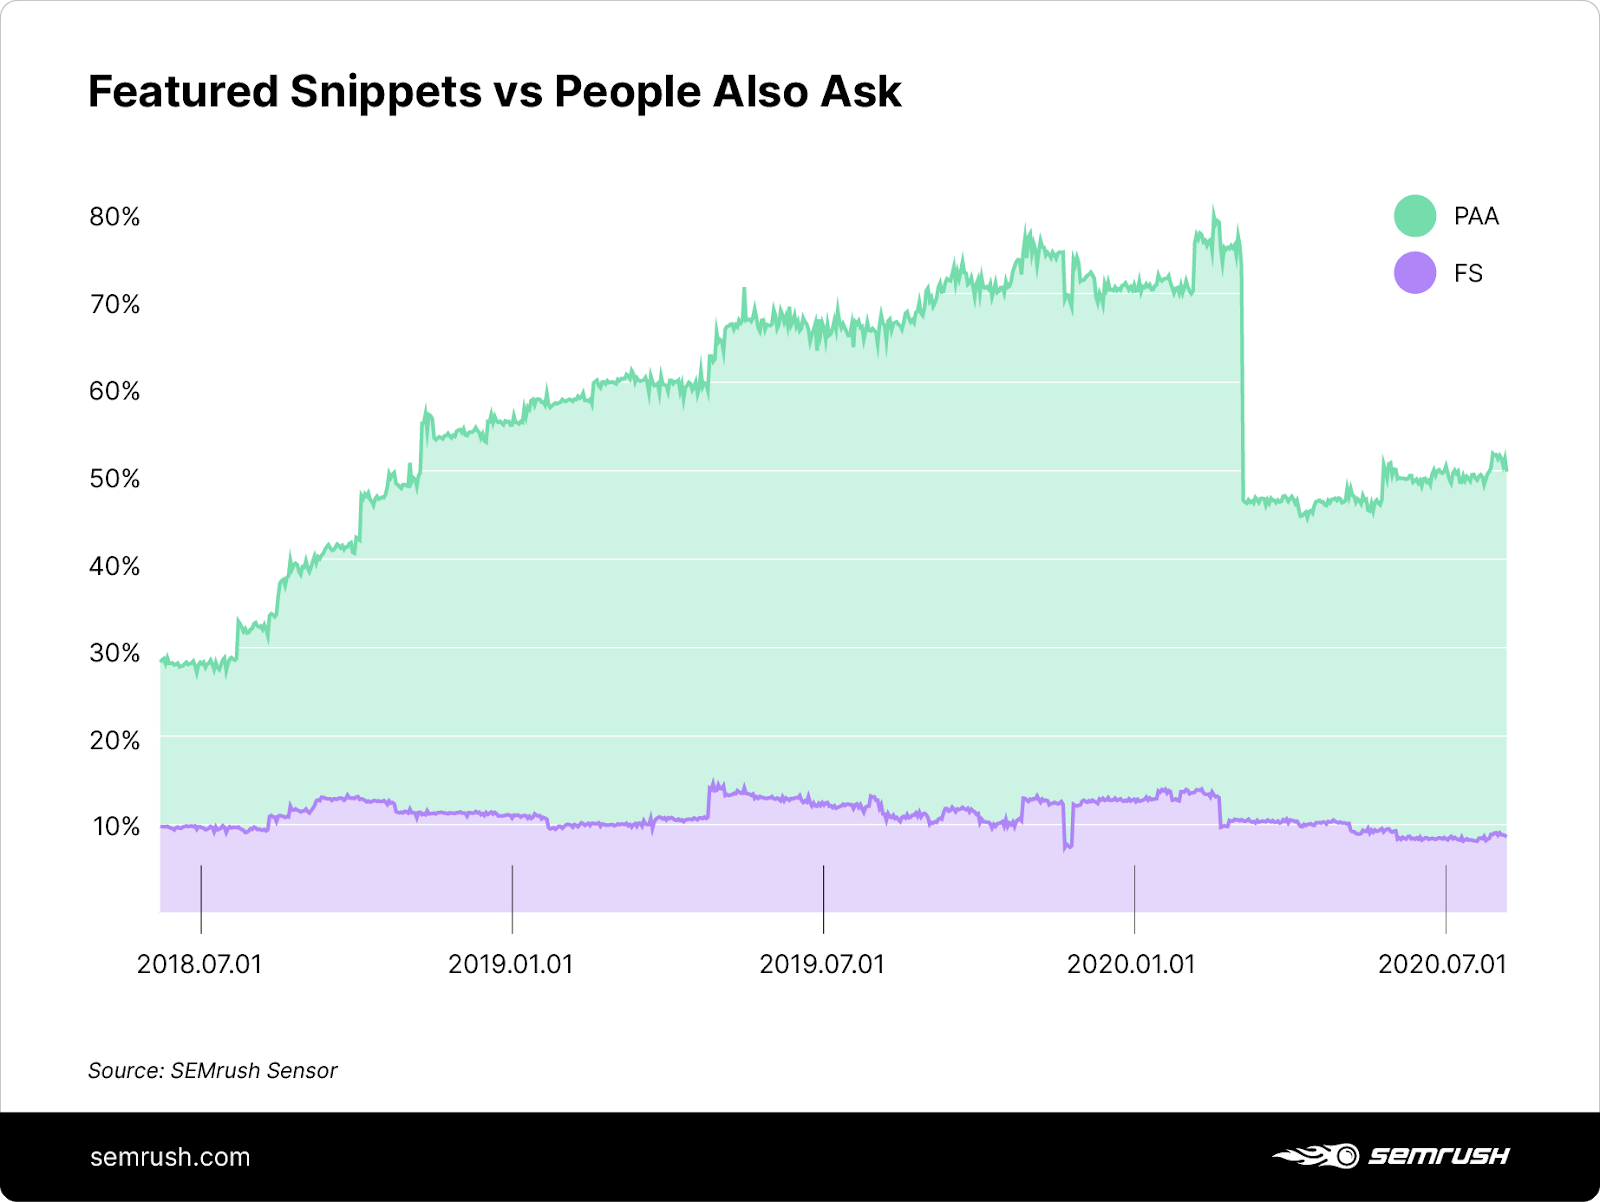 comparing featured snippet and people also ask trend on SERP